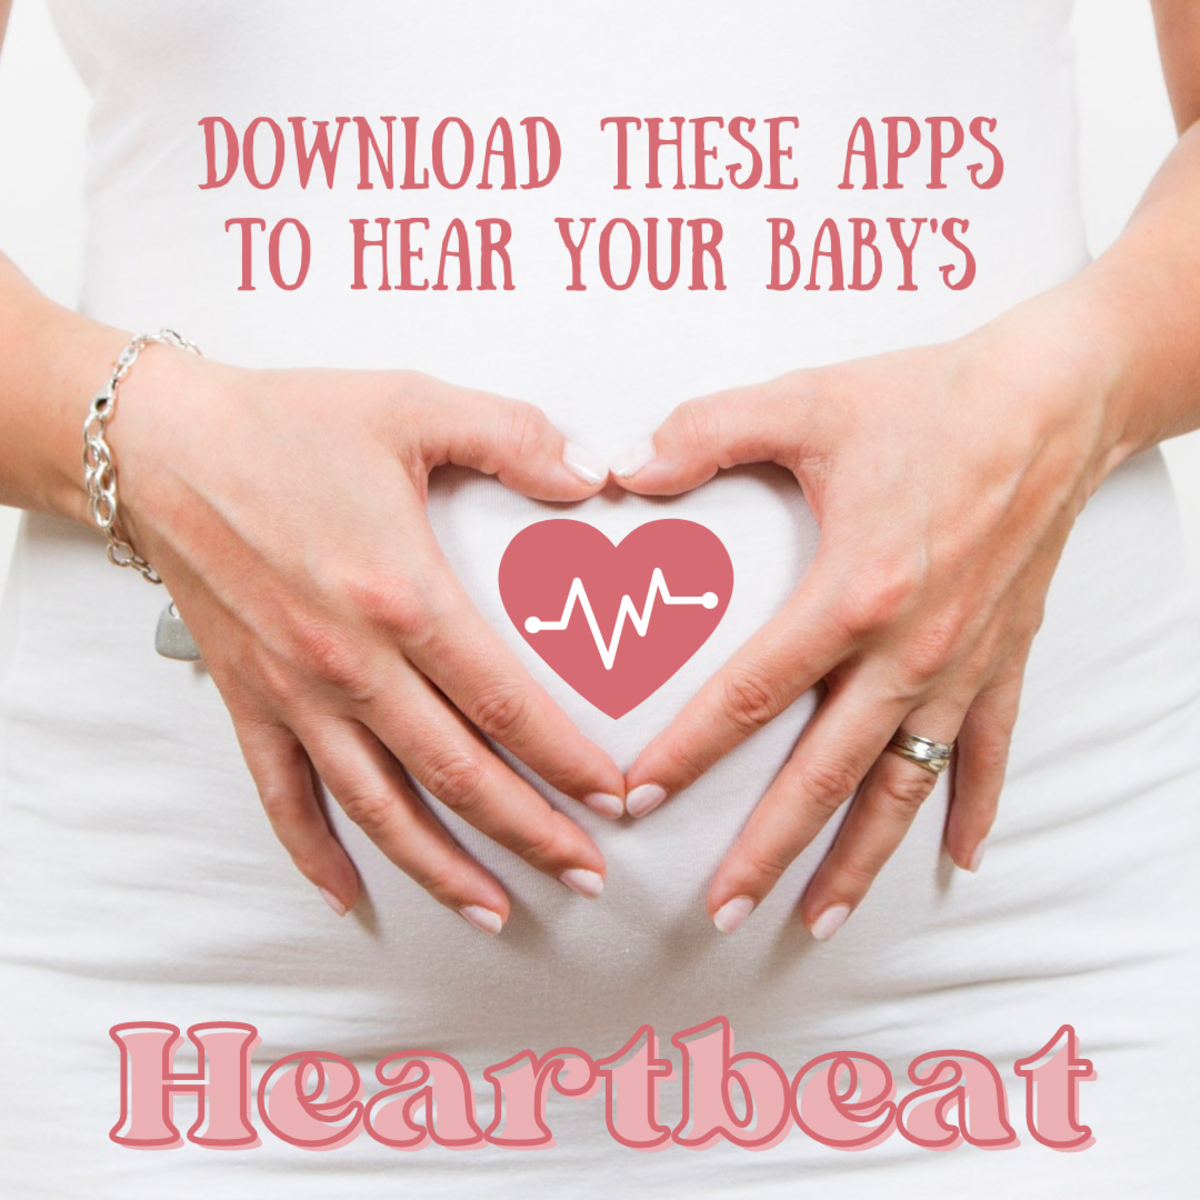 Here are five apps you can use to listen to your baby's heartbeat in utero!